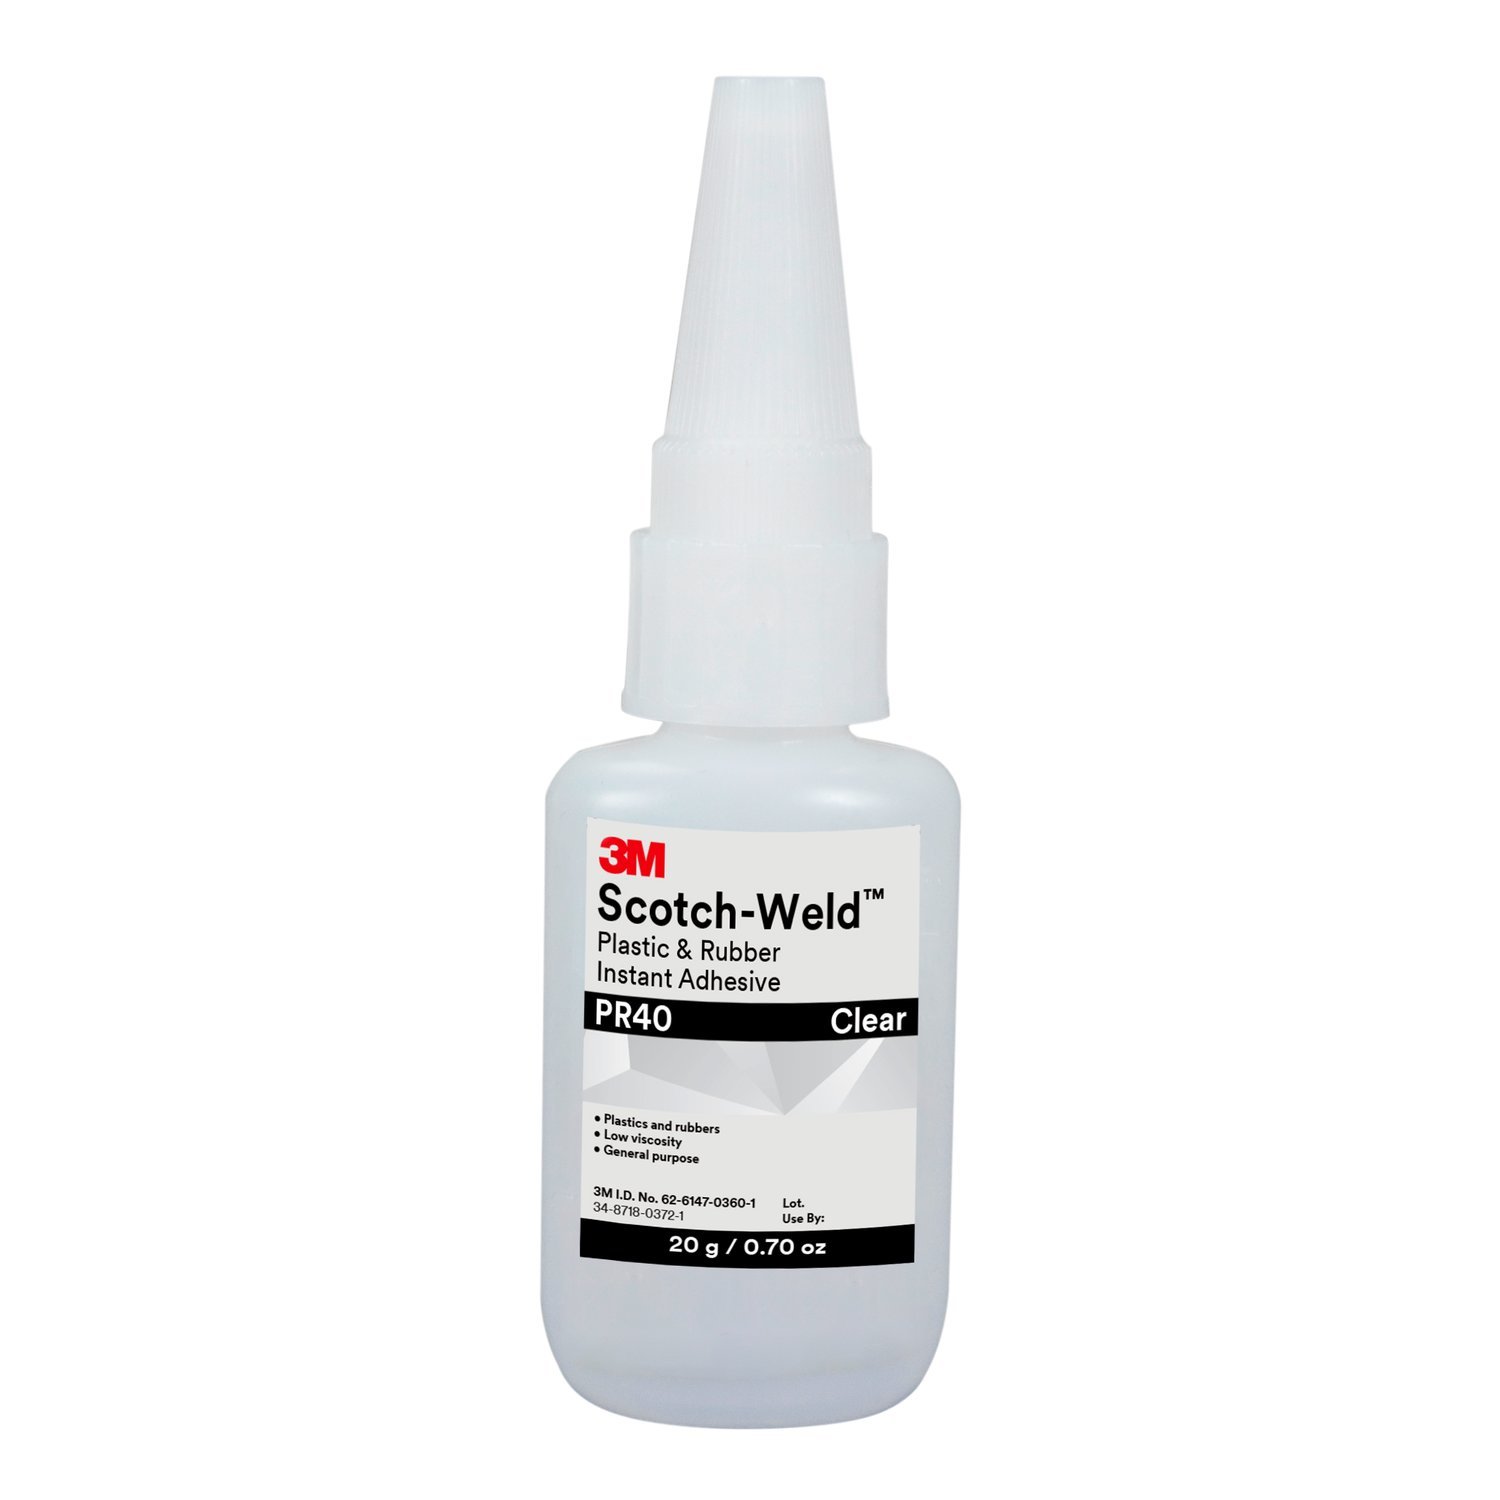 WT-1 Chain Lube Precision Needle Applicator for 2oz Bottle Only